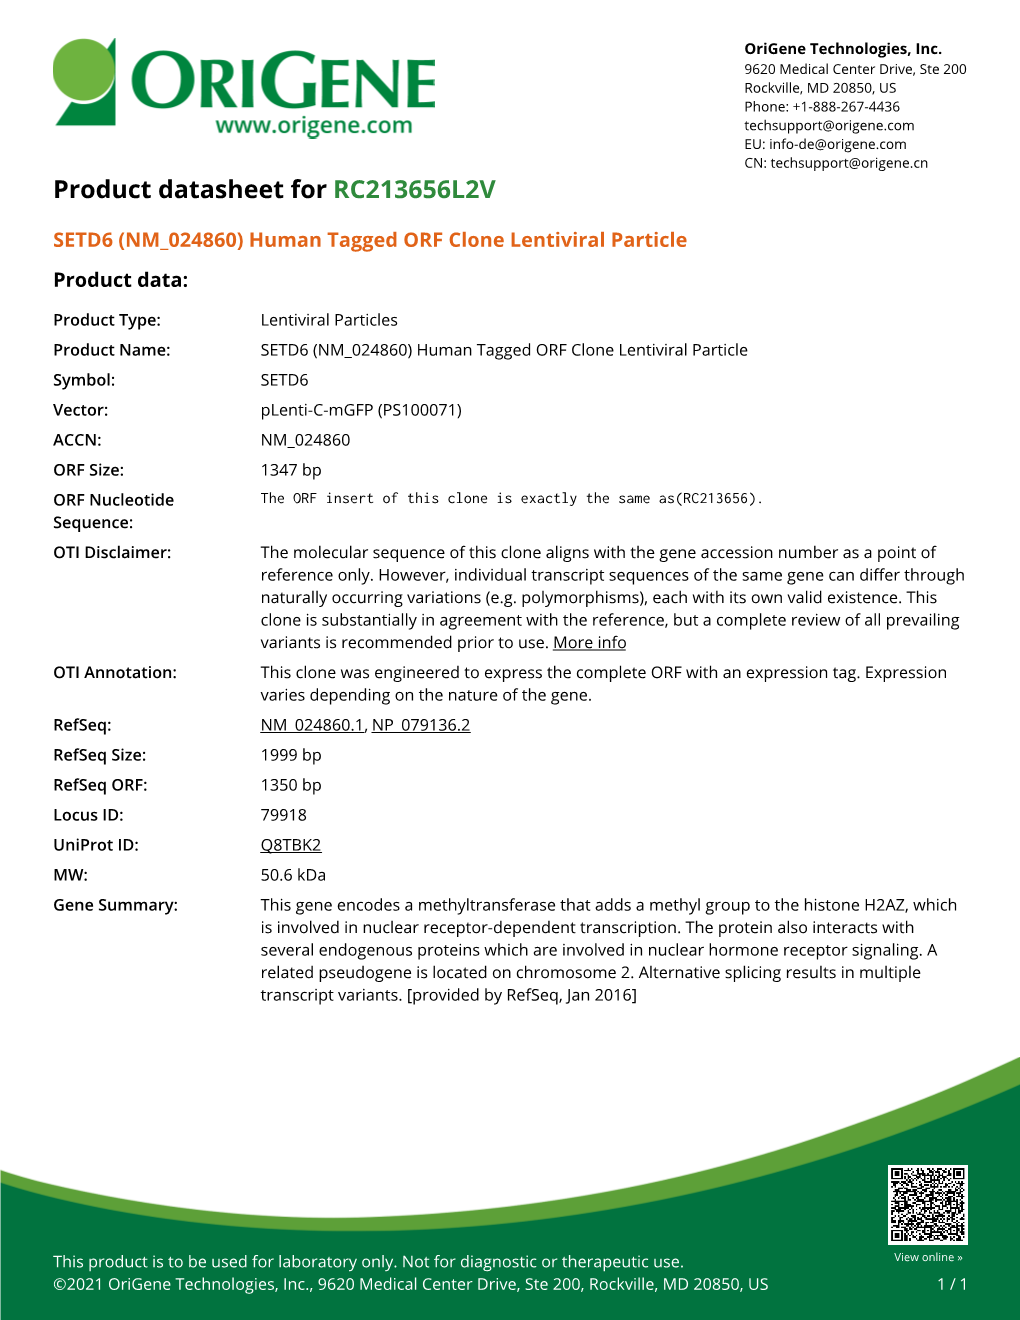 SETD6 (NM 024860) Human Tagged ORF Clone Lentiviral Particle Product Data